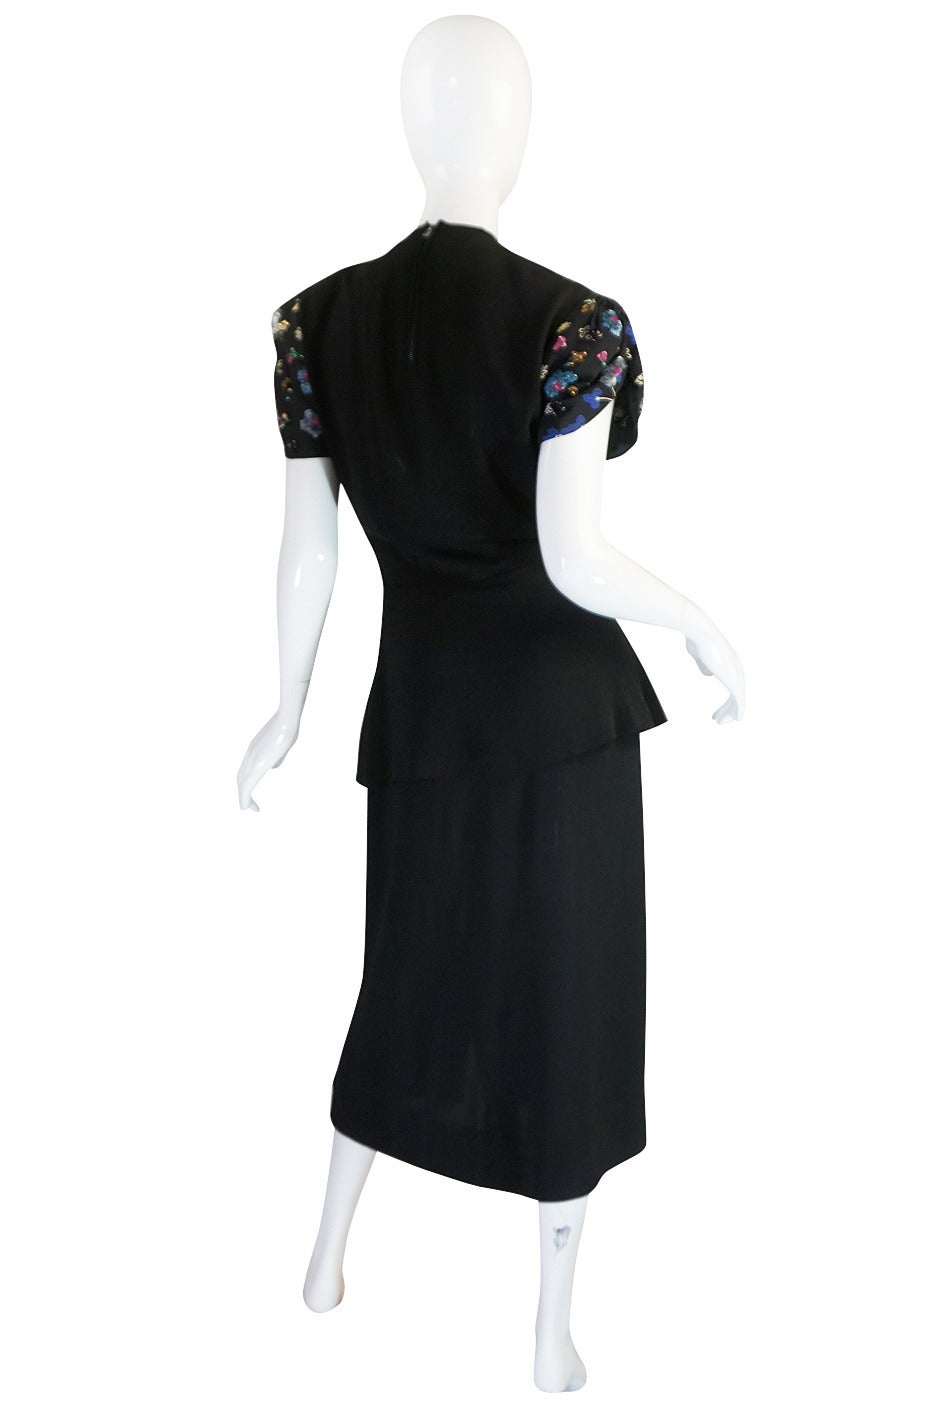 This is an exquisite late thirties, early 40s black silk crepe dress whose bodice is entirely covered with hand painted flowers that are highlighted with hand applied sequins. It is one of the most spectacular dresses from this period I have had in